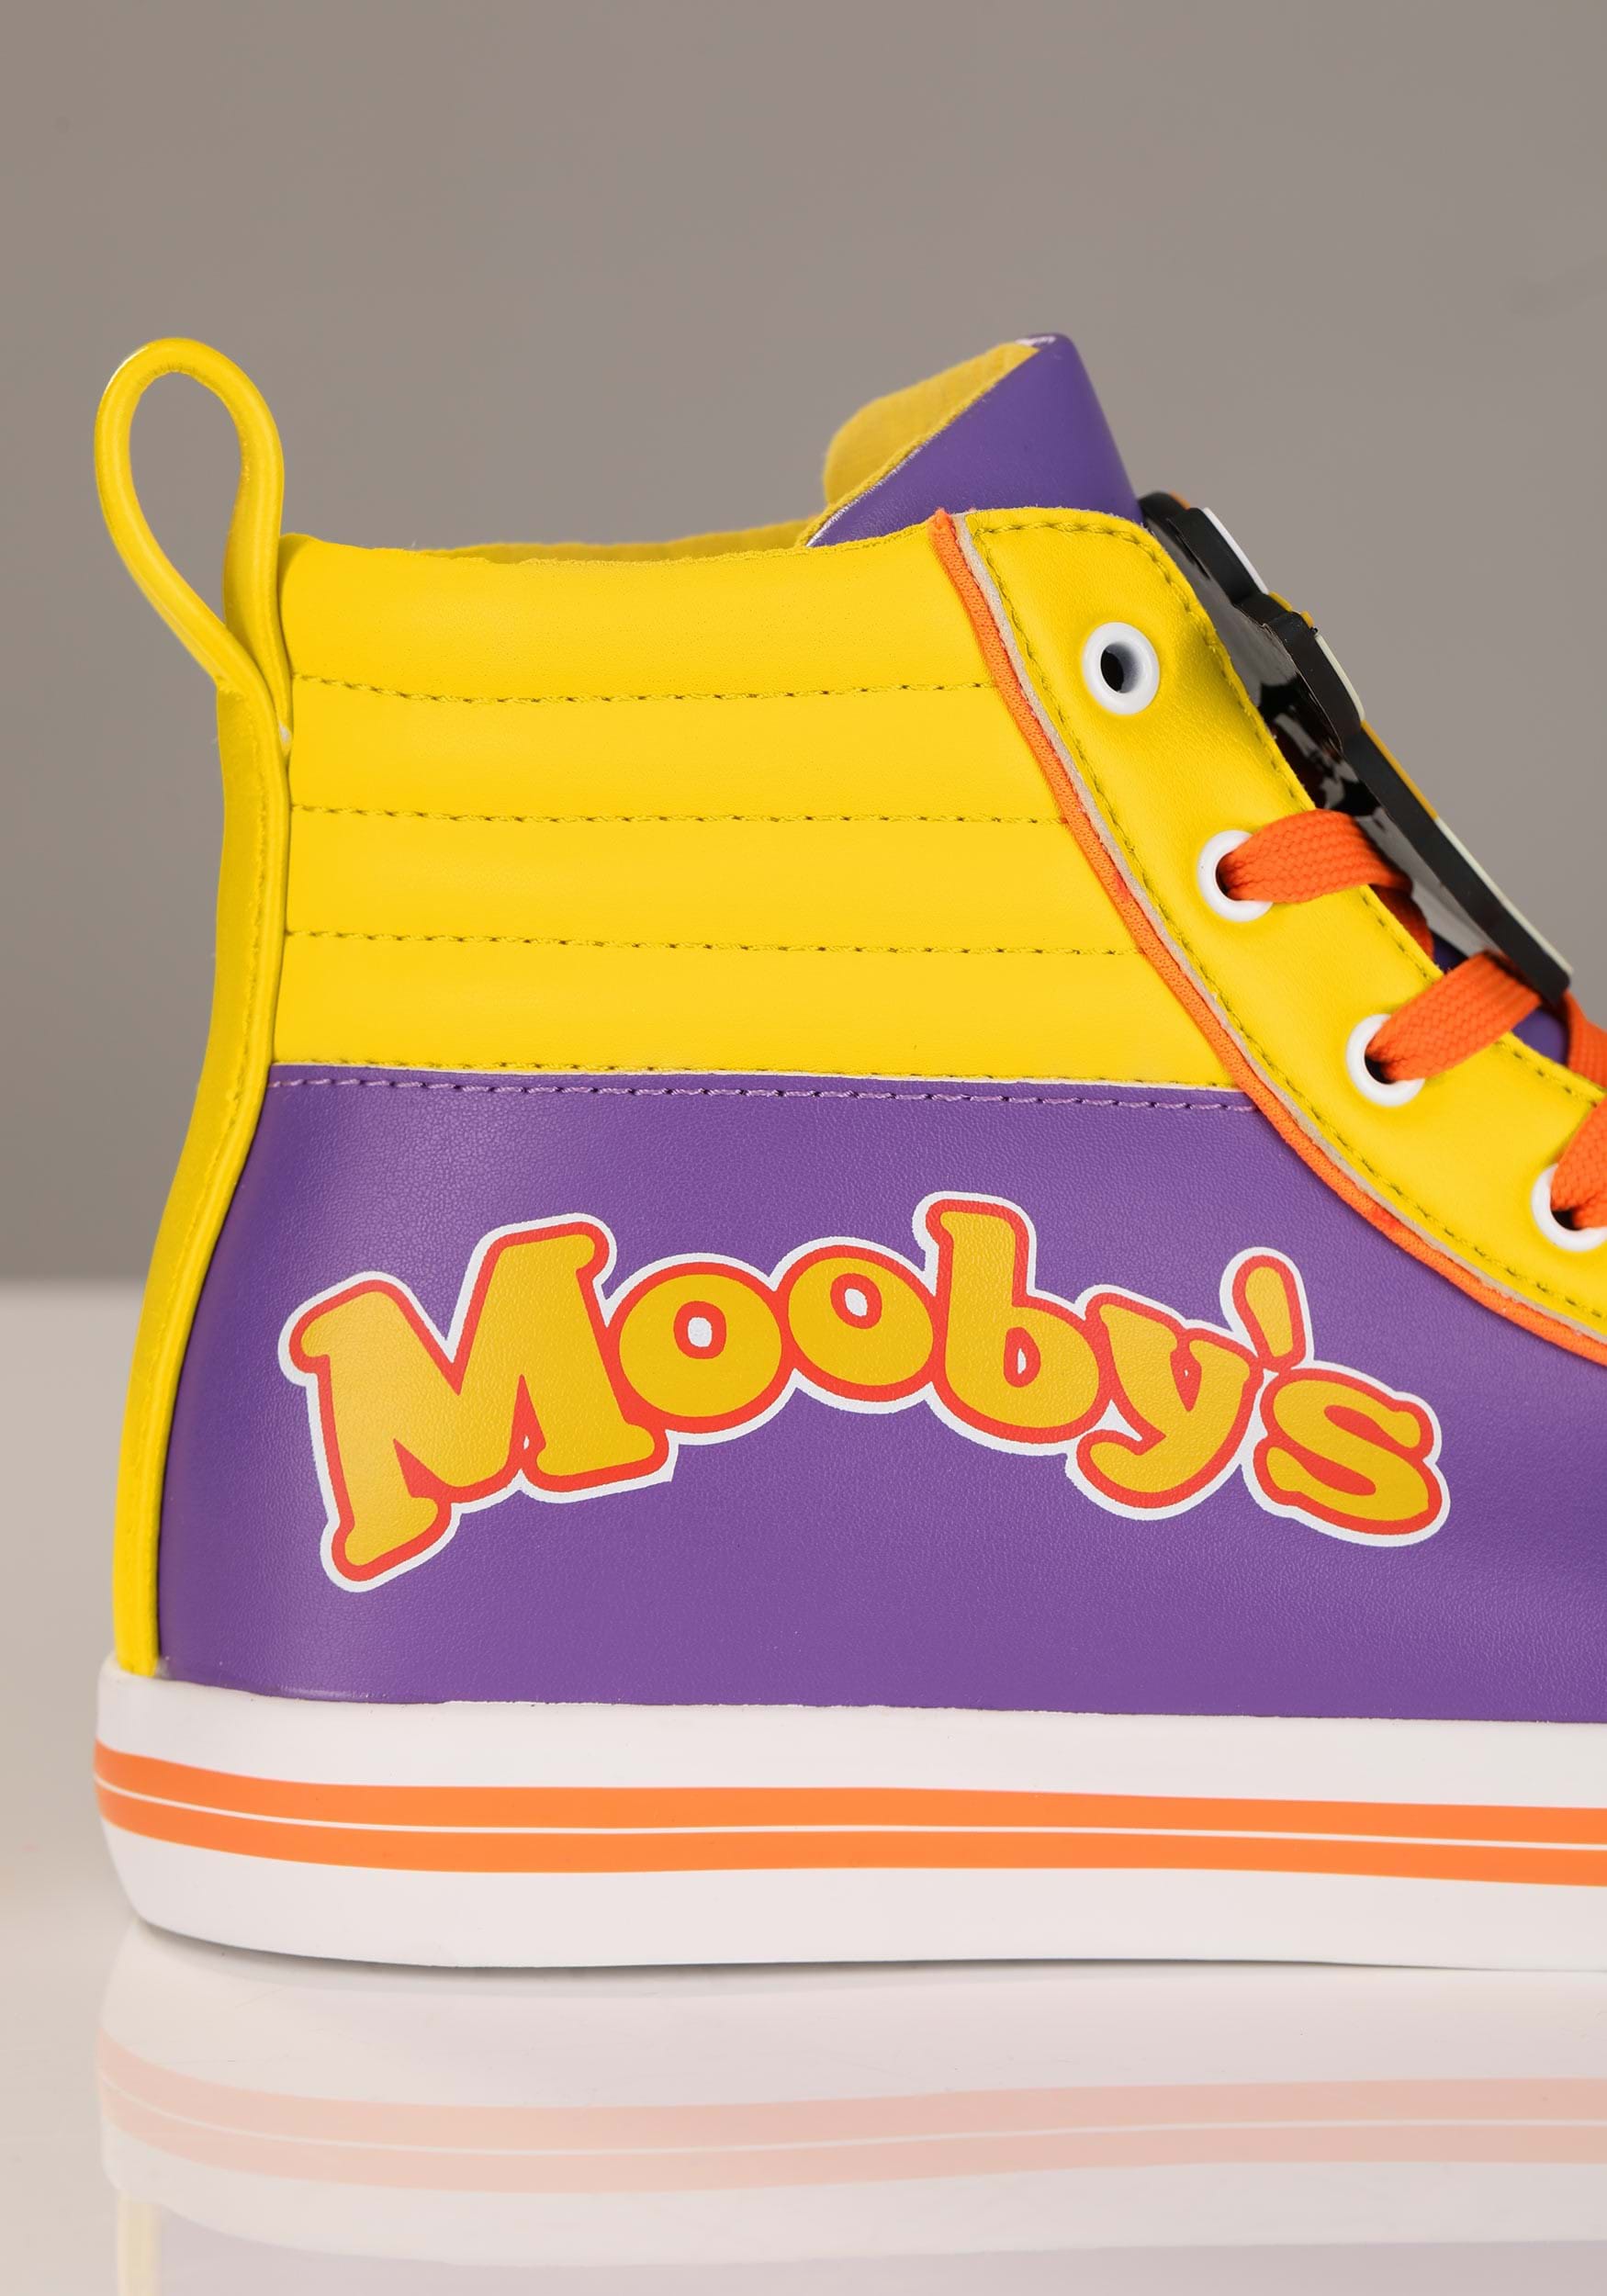 Mooby's Jay And Silent Bob Shoes